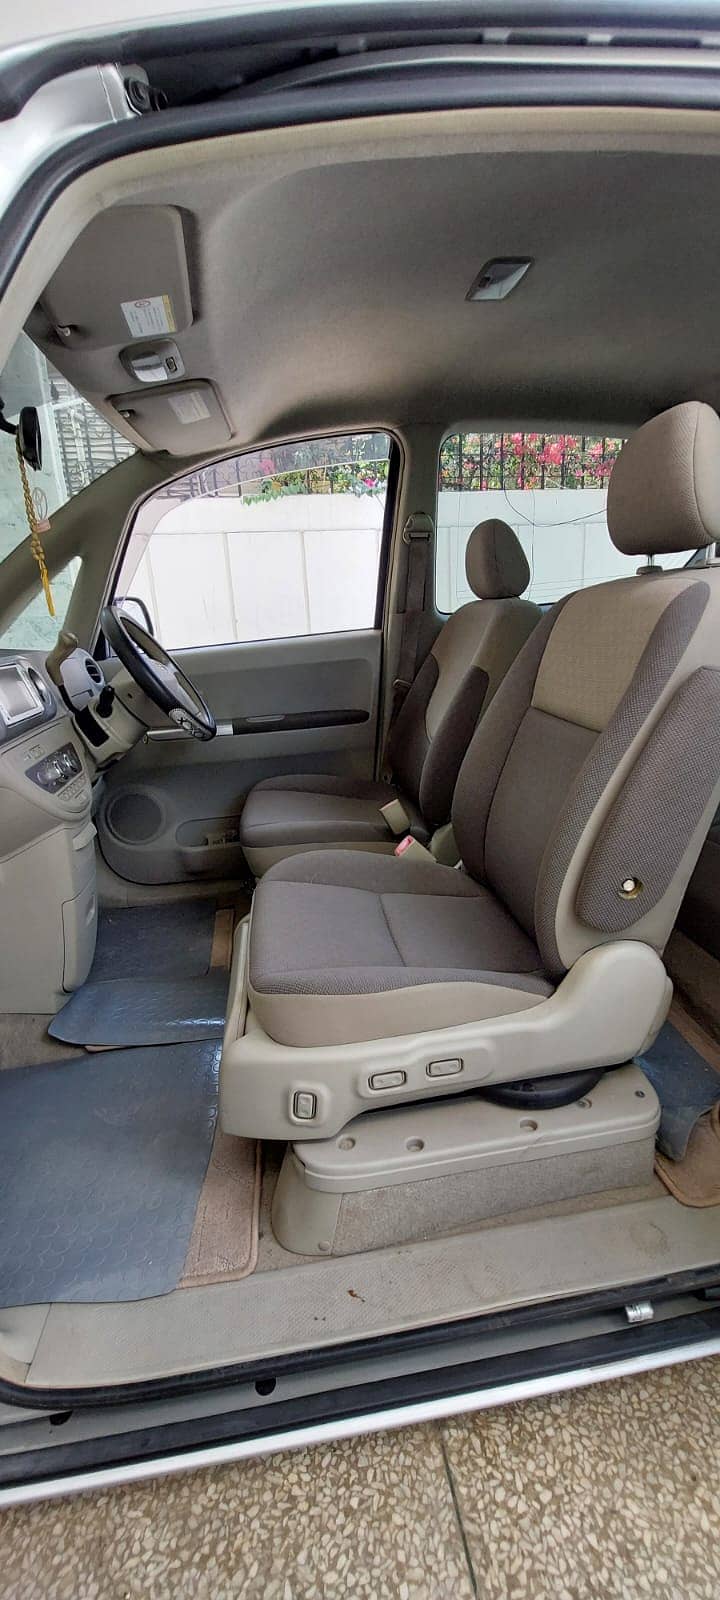 Toyota Porte 2011 with special seat for Disabled/Handicap persons 10